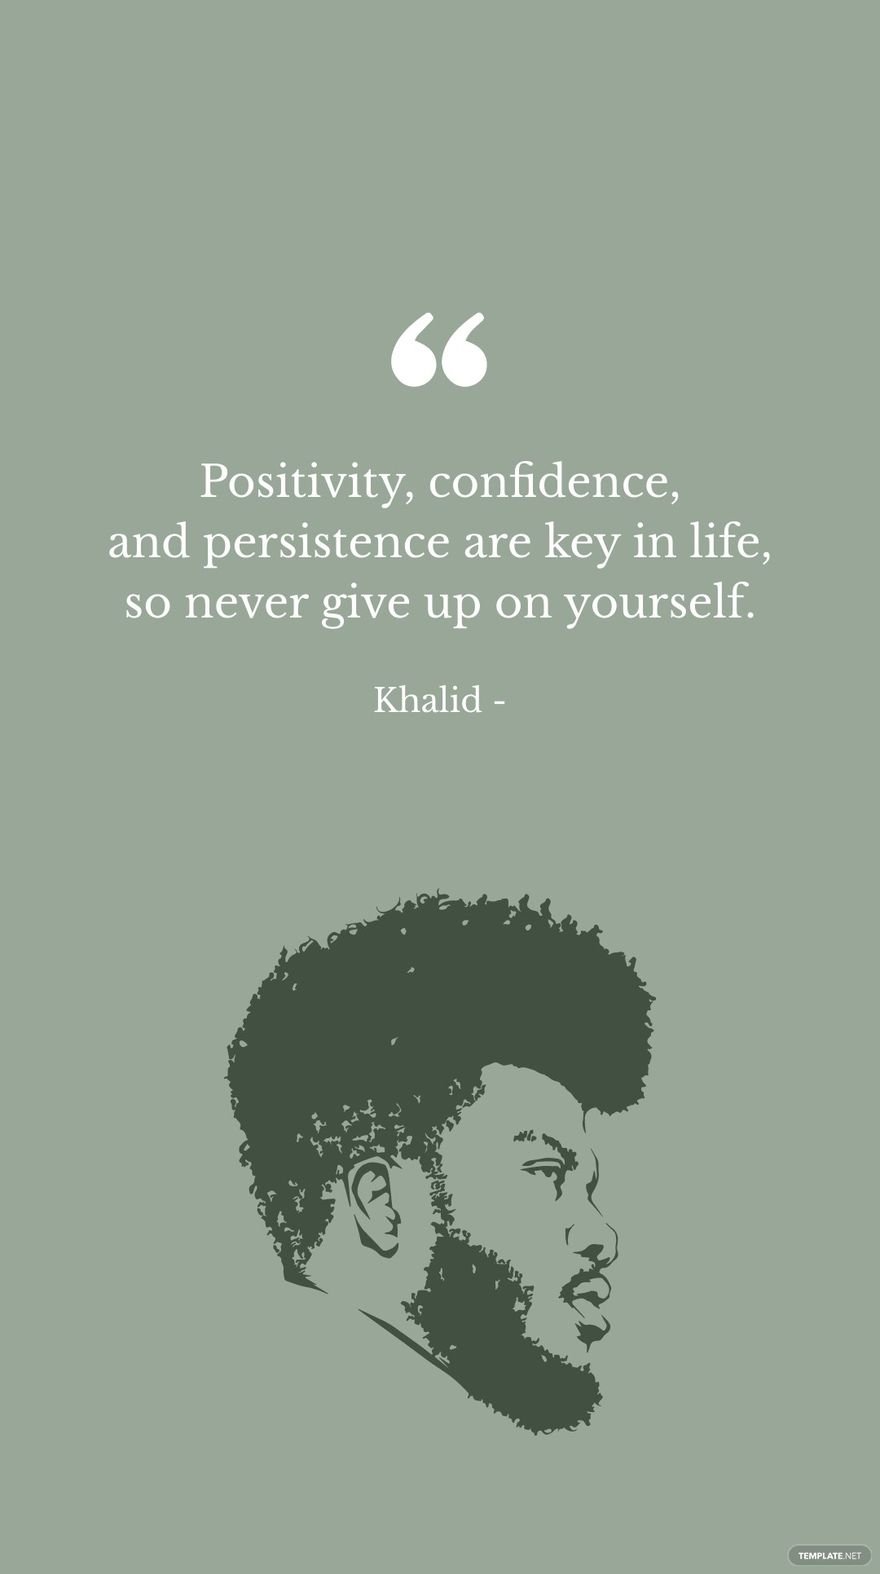 Khalid - Positivity, confidence, and persistence are key in life, so never give up on yourself.